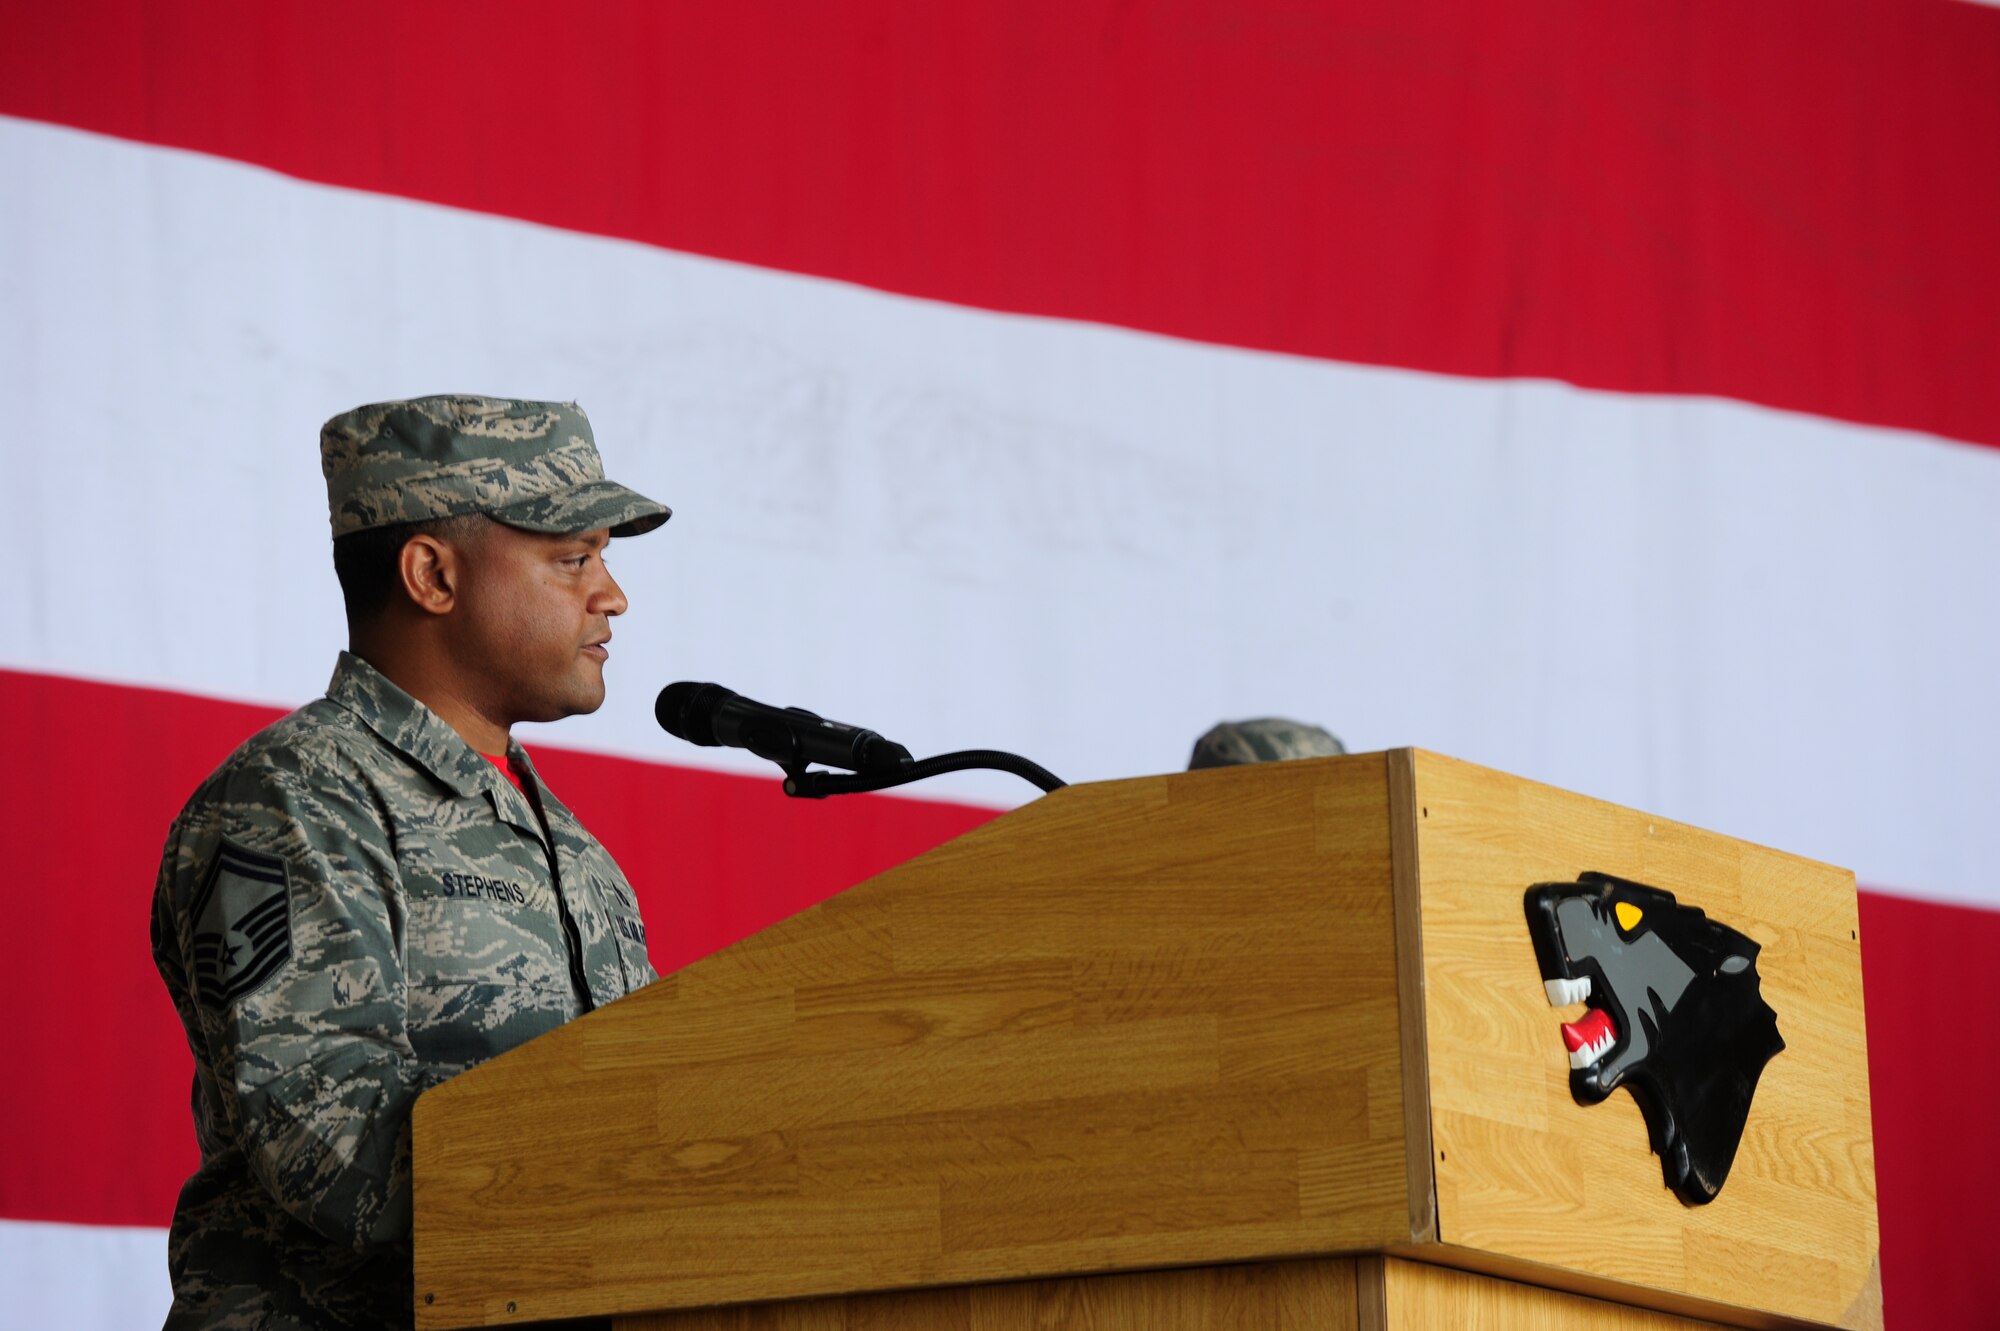 Senior Master Sgt. Henry Stephens gives a speech during a 9-11 Remembrance Day Ceremony at Kunsan Air Base, Republic of Korea, Sept. 11, 2015. United States Air Force Airmen and Republic of Korea air force members attended the ceremony to the remember the events that occurred during the terrorist attacks14 years ago. (U.S. Air Force photo by Staff Sgt. Nick Wilson/Released)